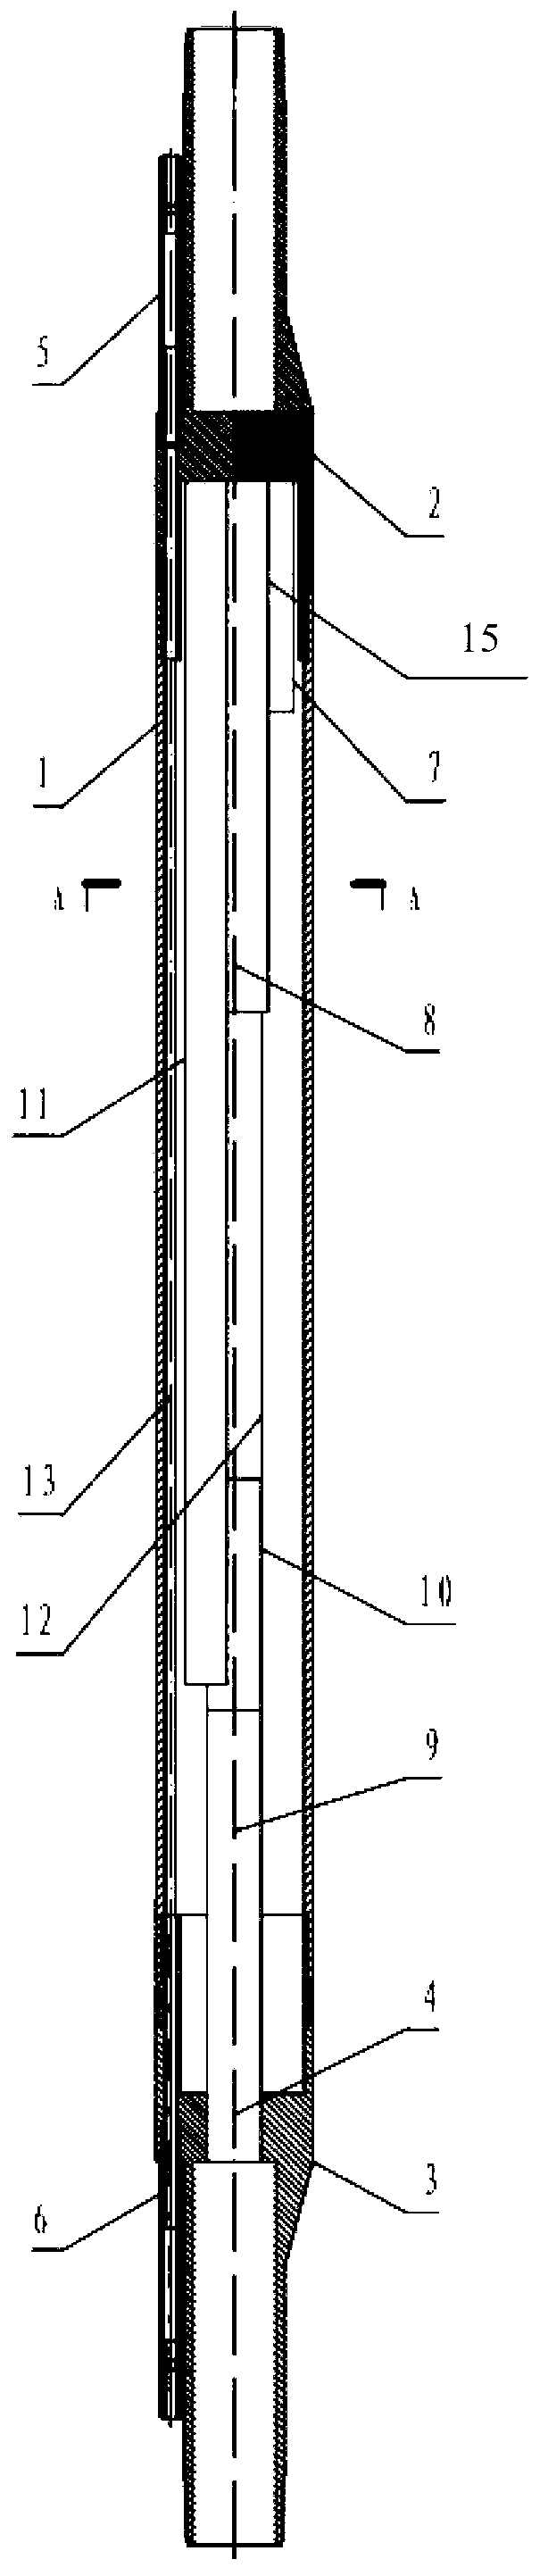 Control device for underground layered flow rate of water injection well